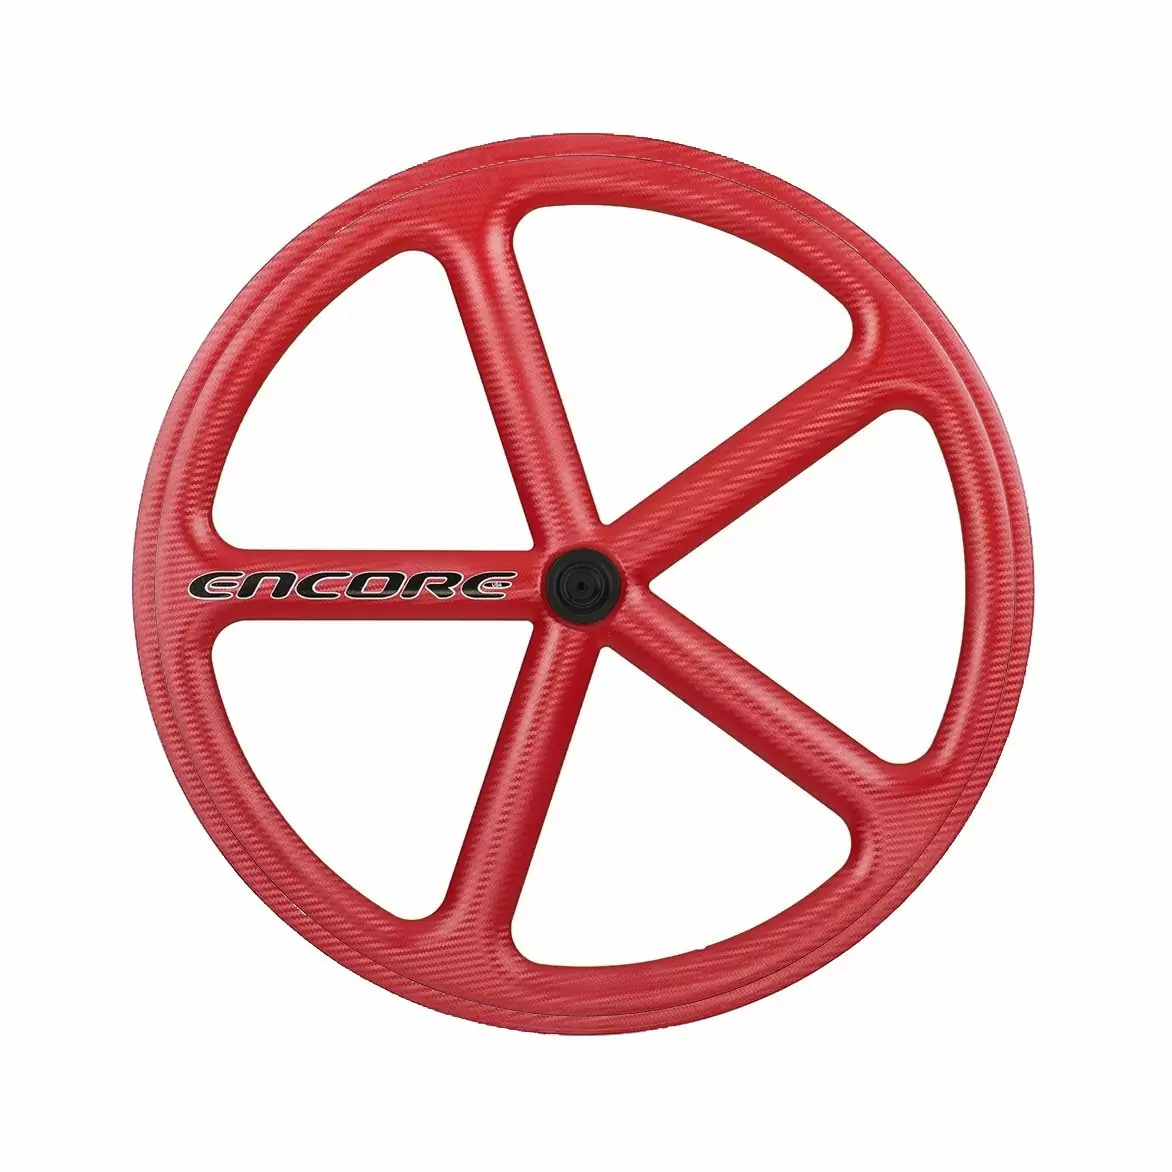 rear wheel 700c track 5 spokes carbon weave red nmsw - image